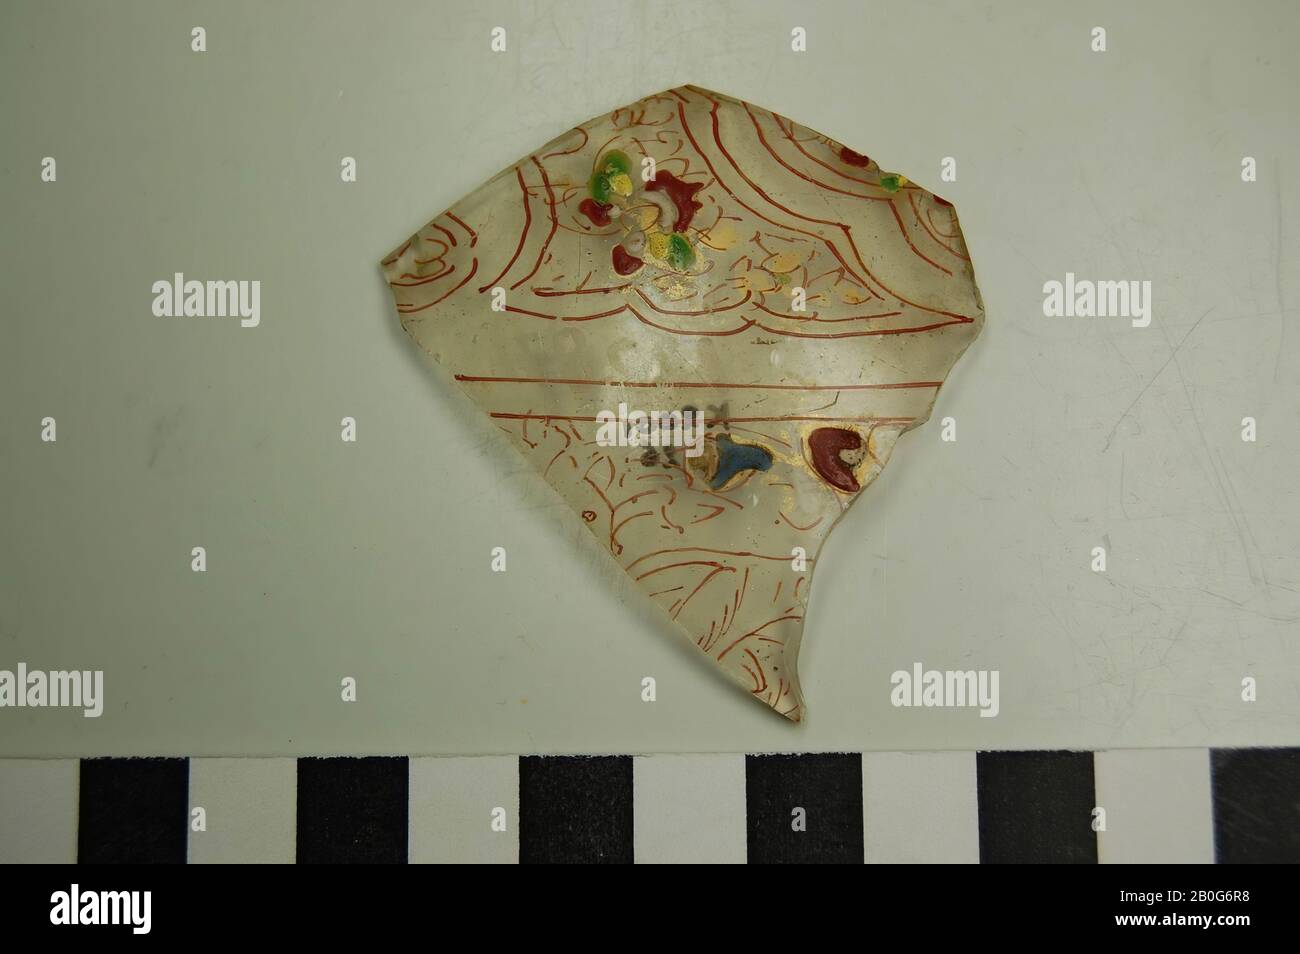 Glass shard made of transparent glass, decorated with red, yellow and green. Old inventory number: 12287., shard, glass, 6 cm, Roman 50-100, Egypt Stock Photo